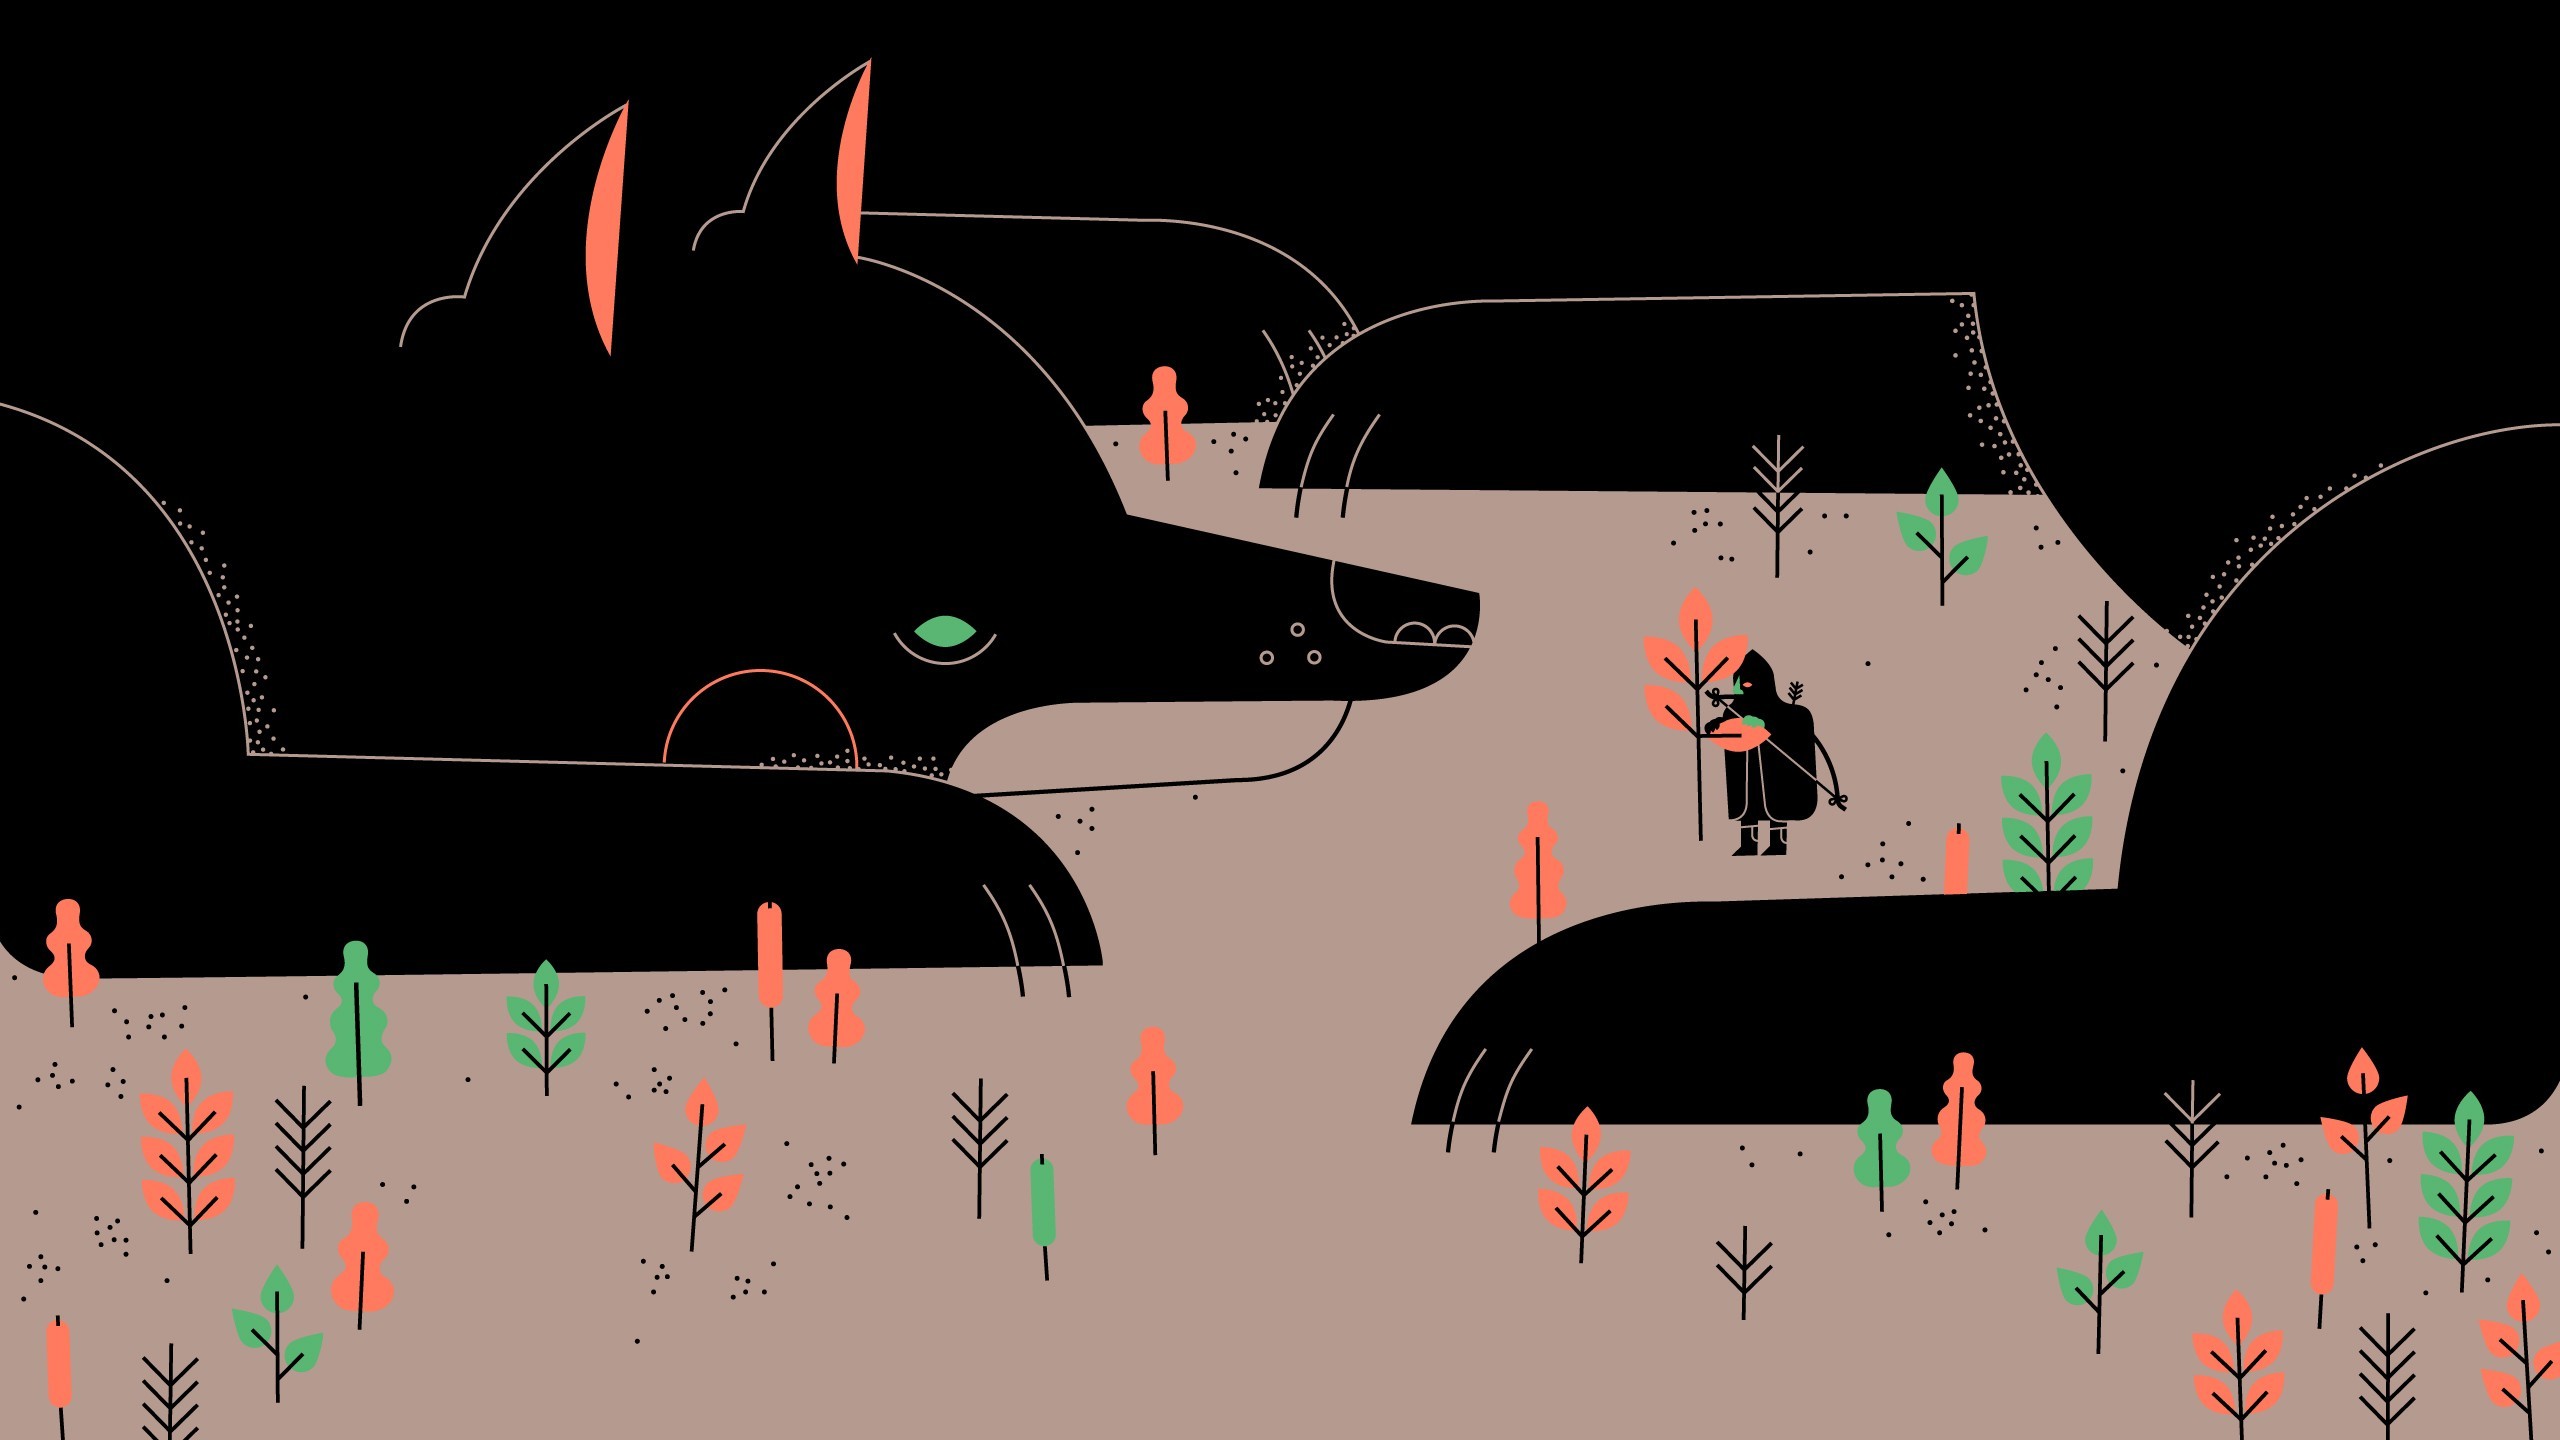 archers, Digital Art, Artwork, Simple, Trees, Animals, Dog, Bows, Leaves, Paws Wallpaper